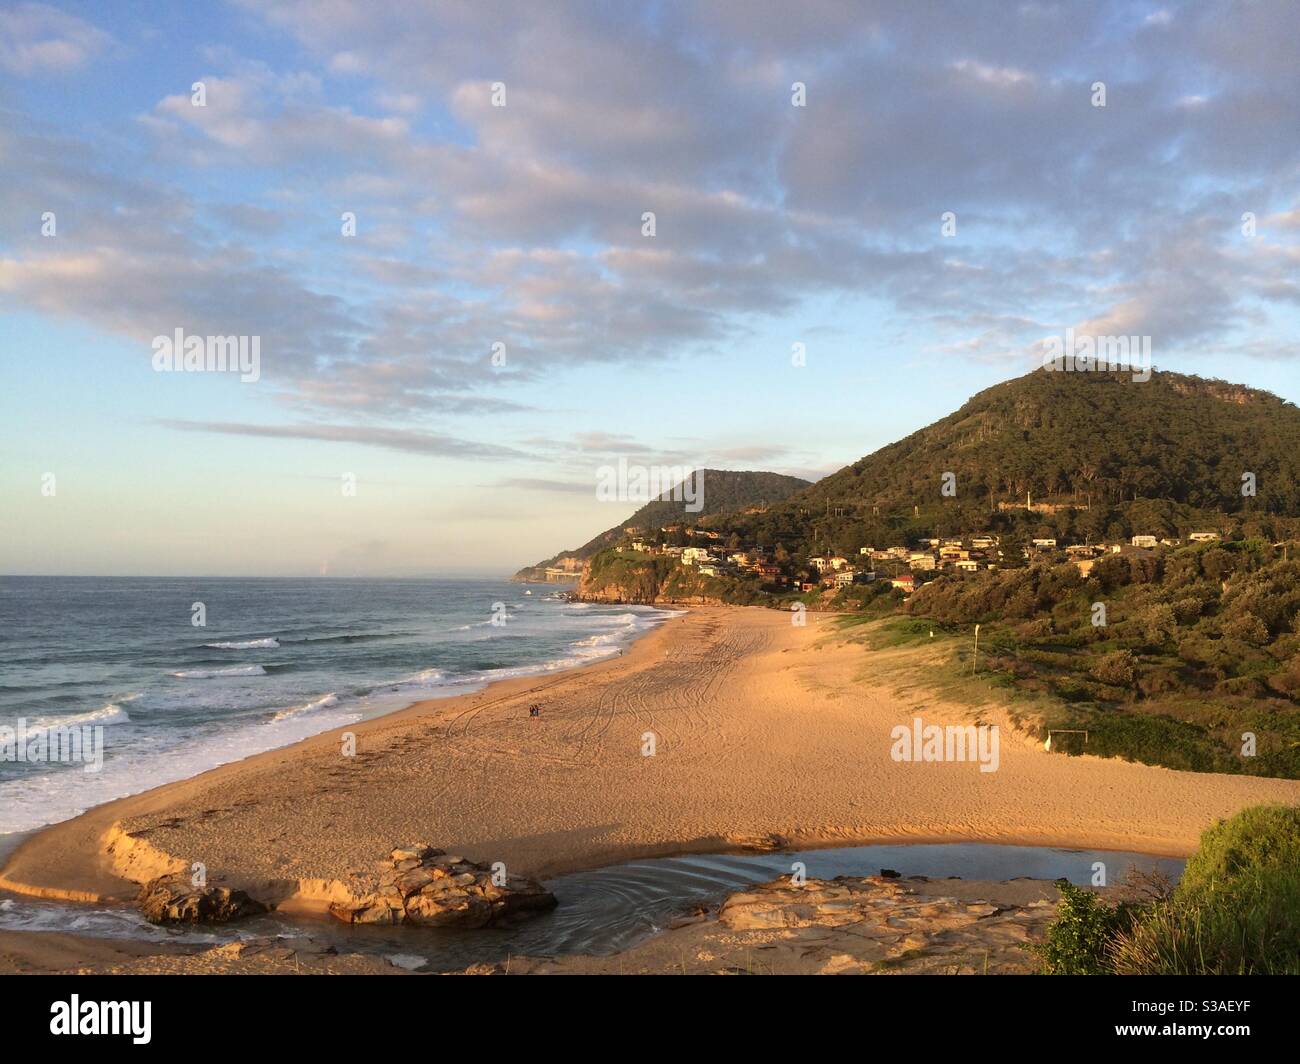 Stanwell Park beach as seen from the North end of Stanwell Park, NSW Australia Stock Photo